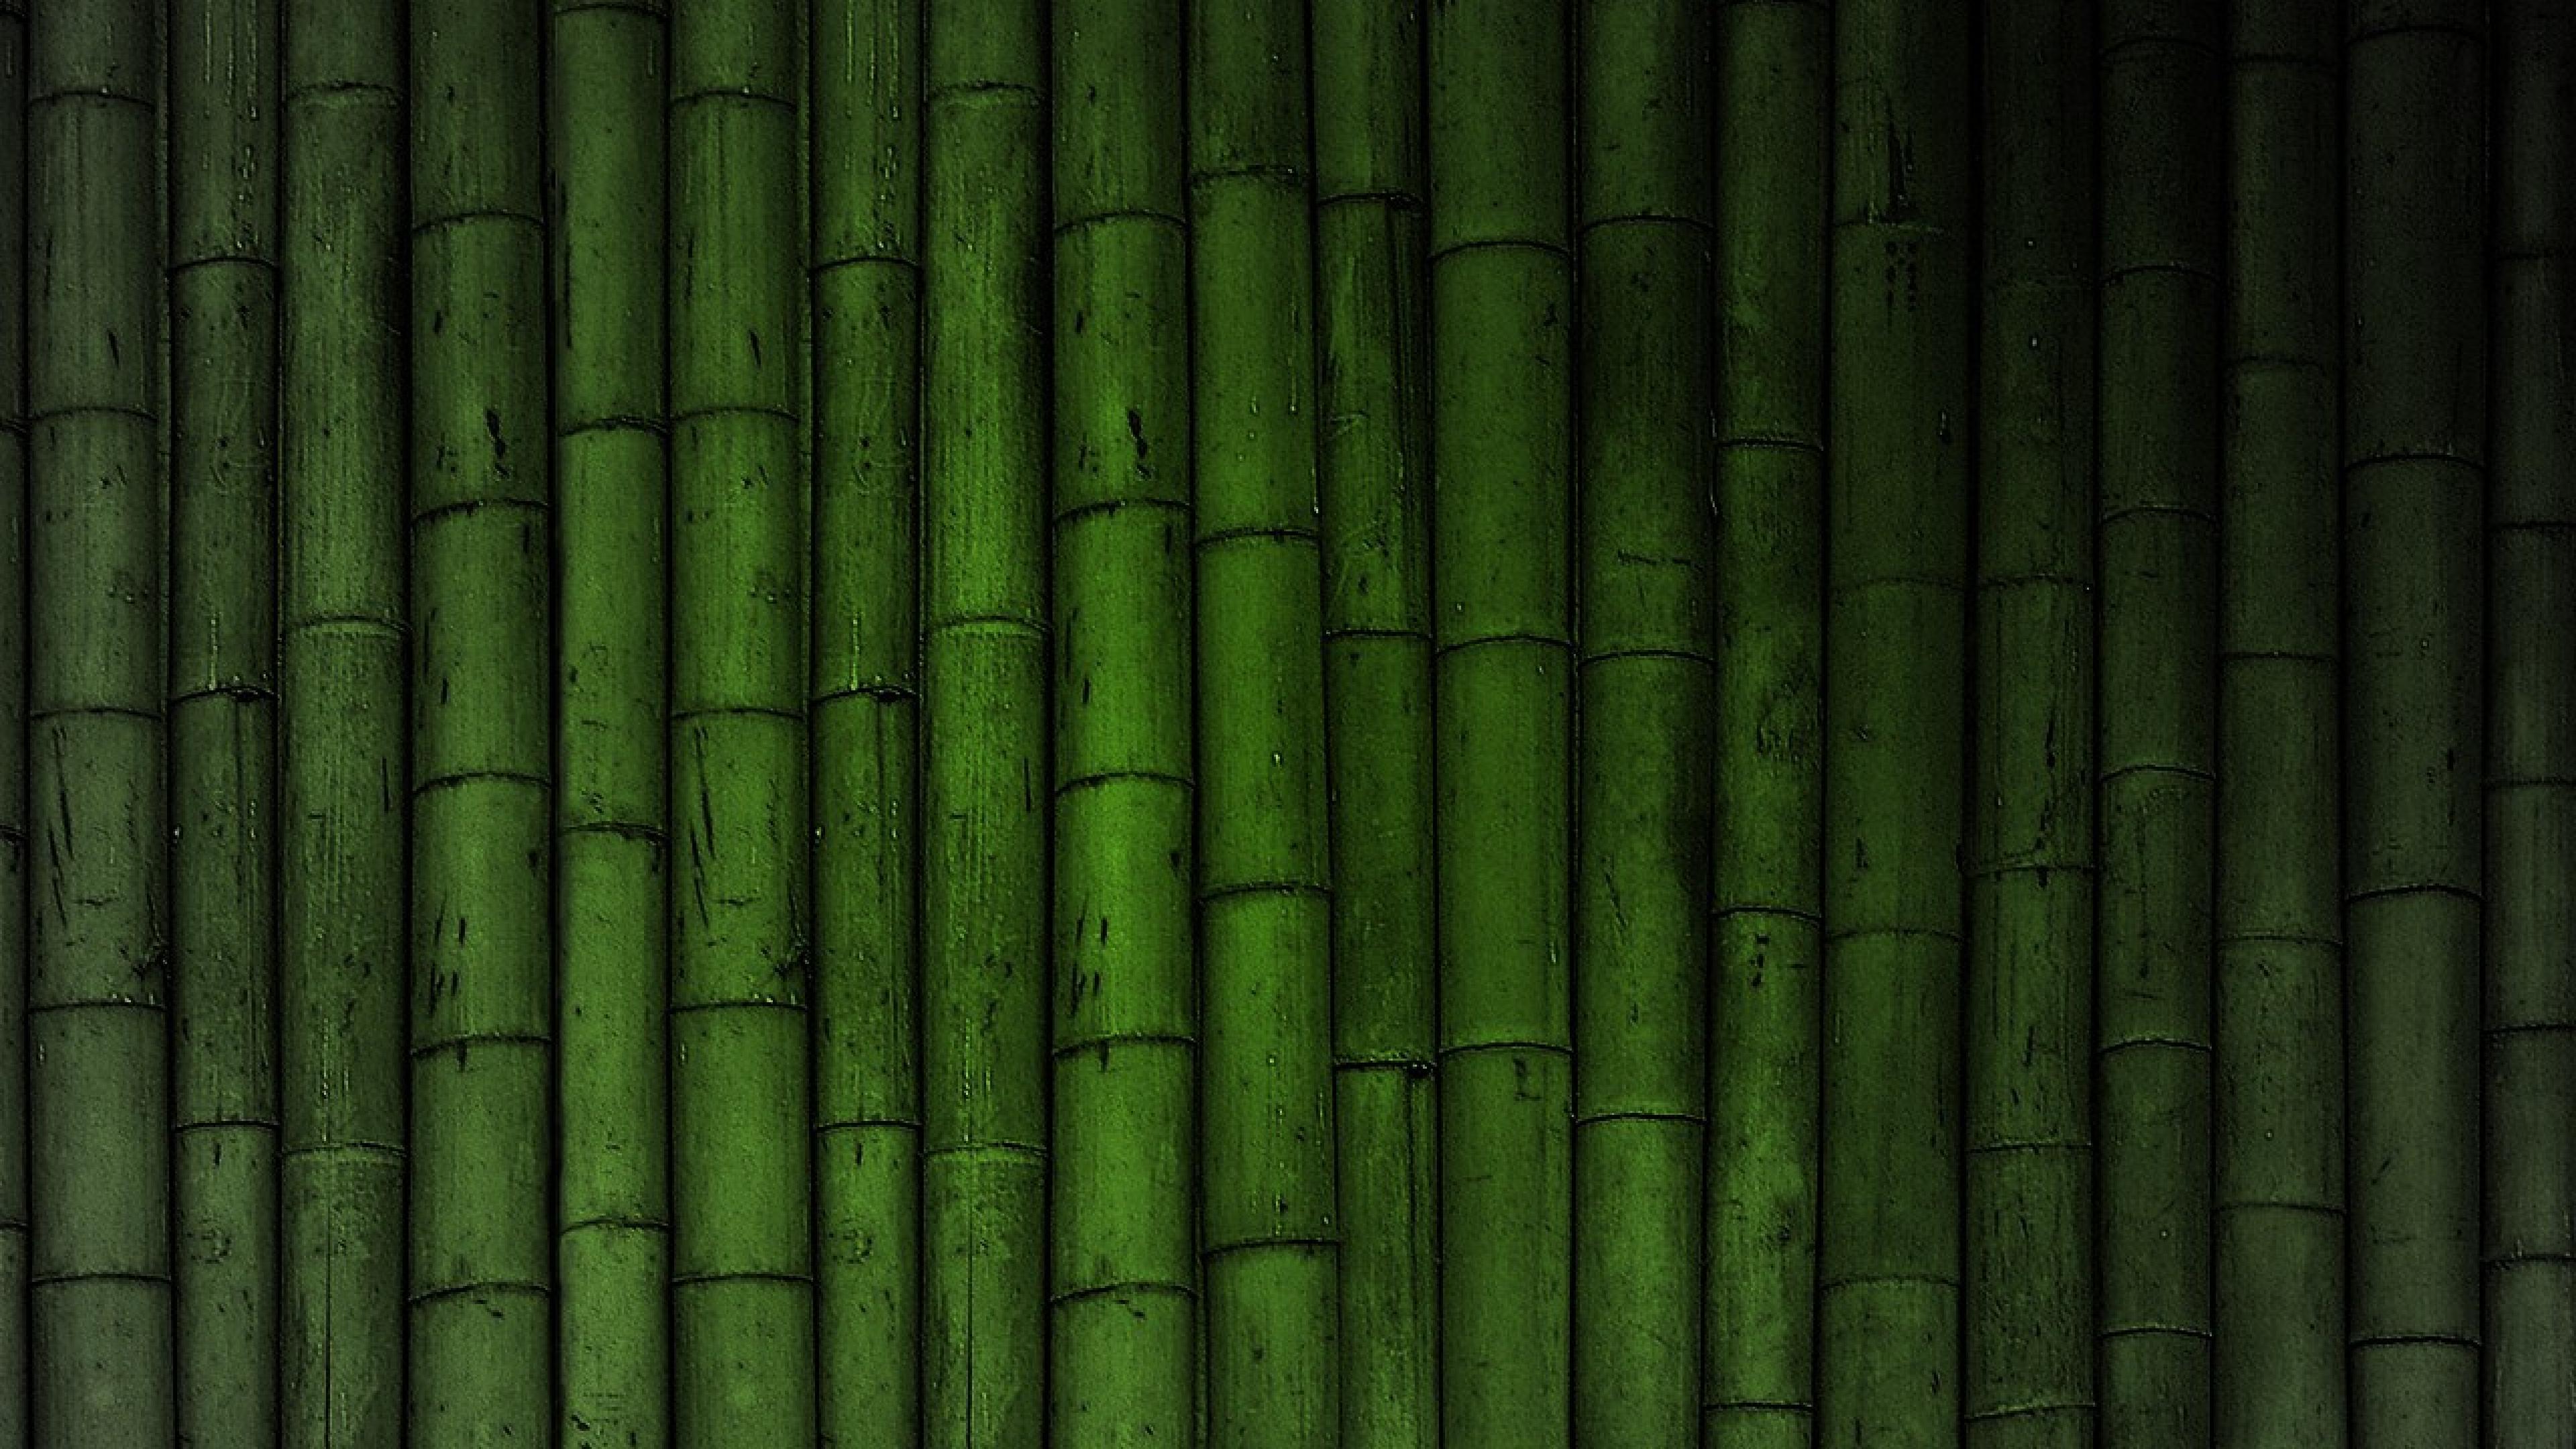 Bamboo Landscape Photography Background Green Bamboo Bamboo Forest  Scenery Bamboo Background Image And Wallpaper for Free Download